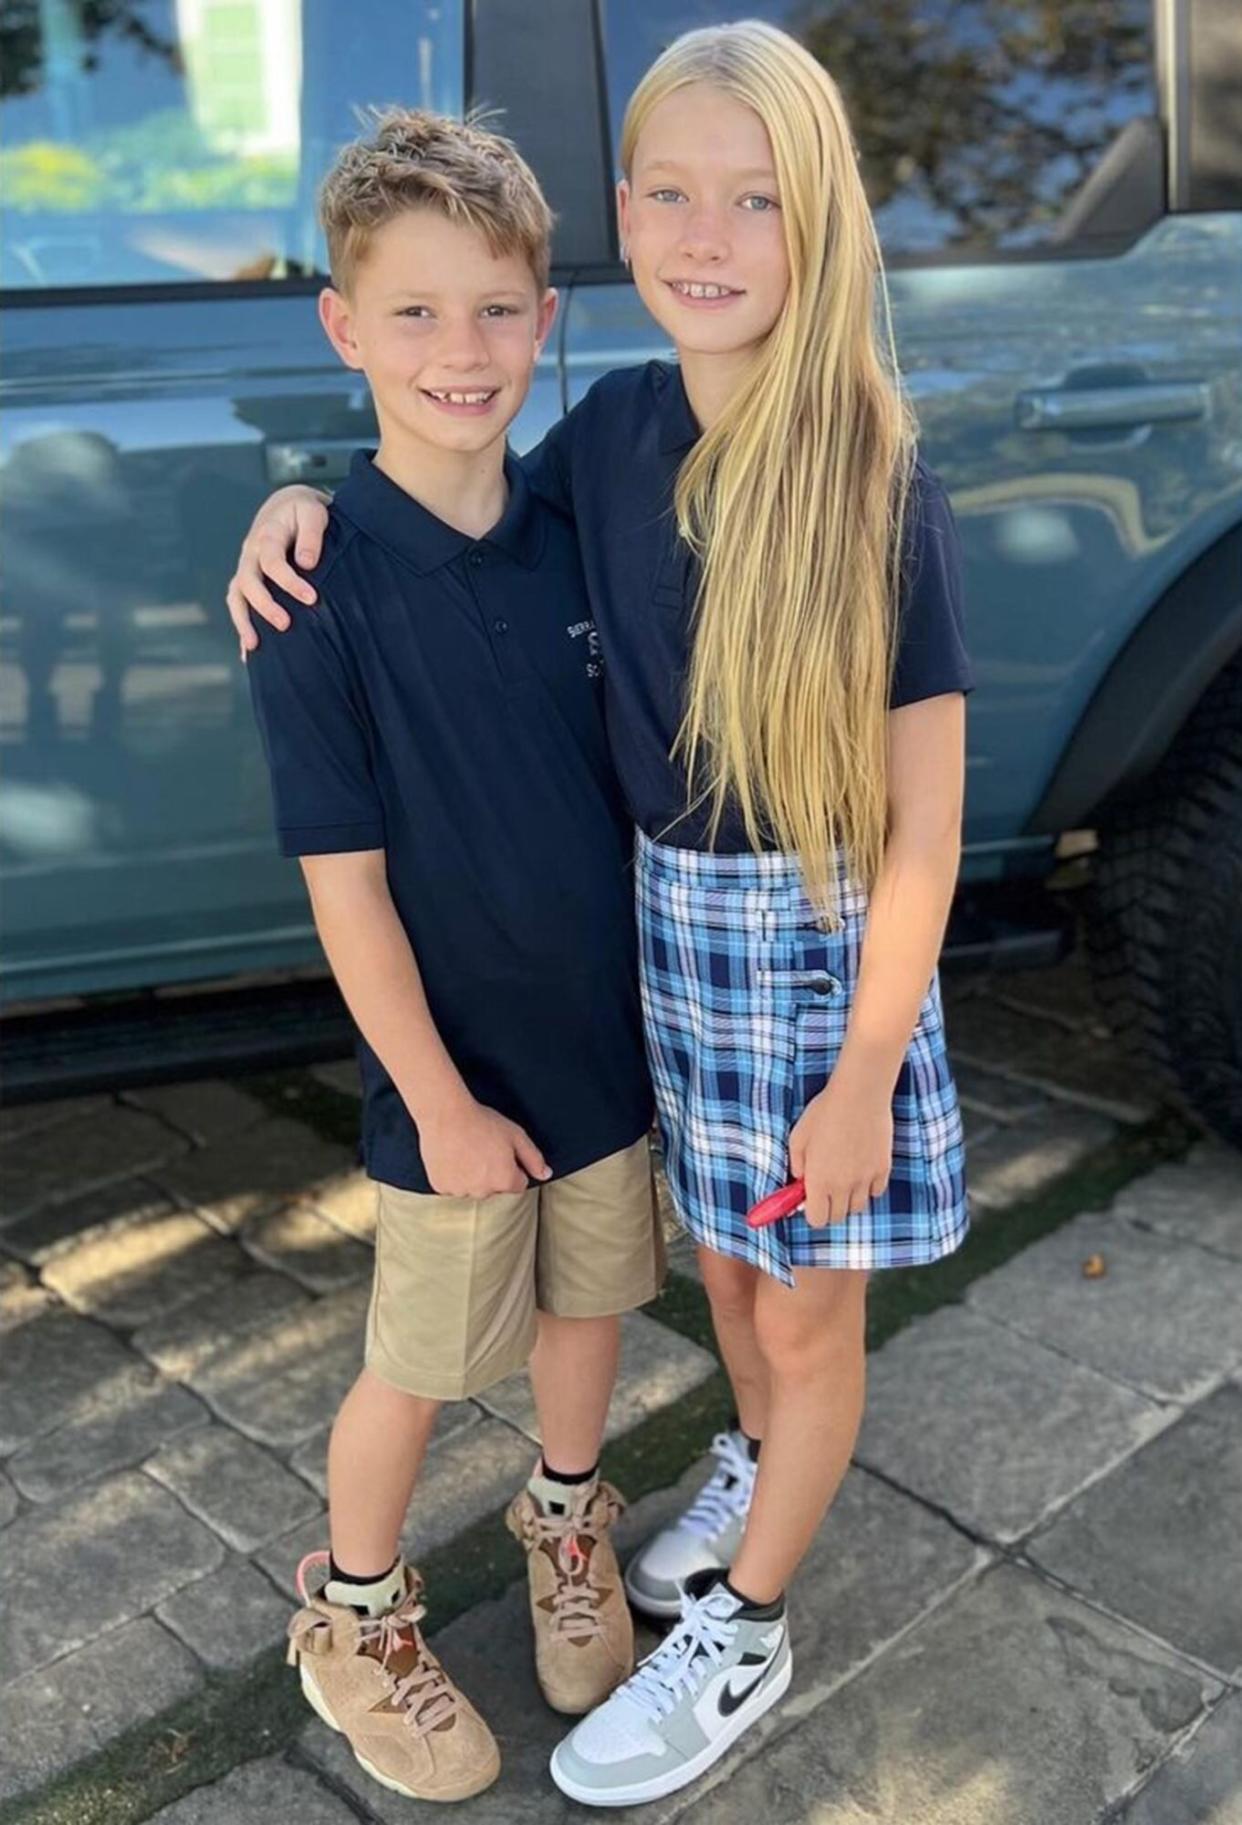 These two had an amazing first day of school!